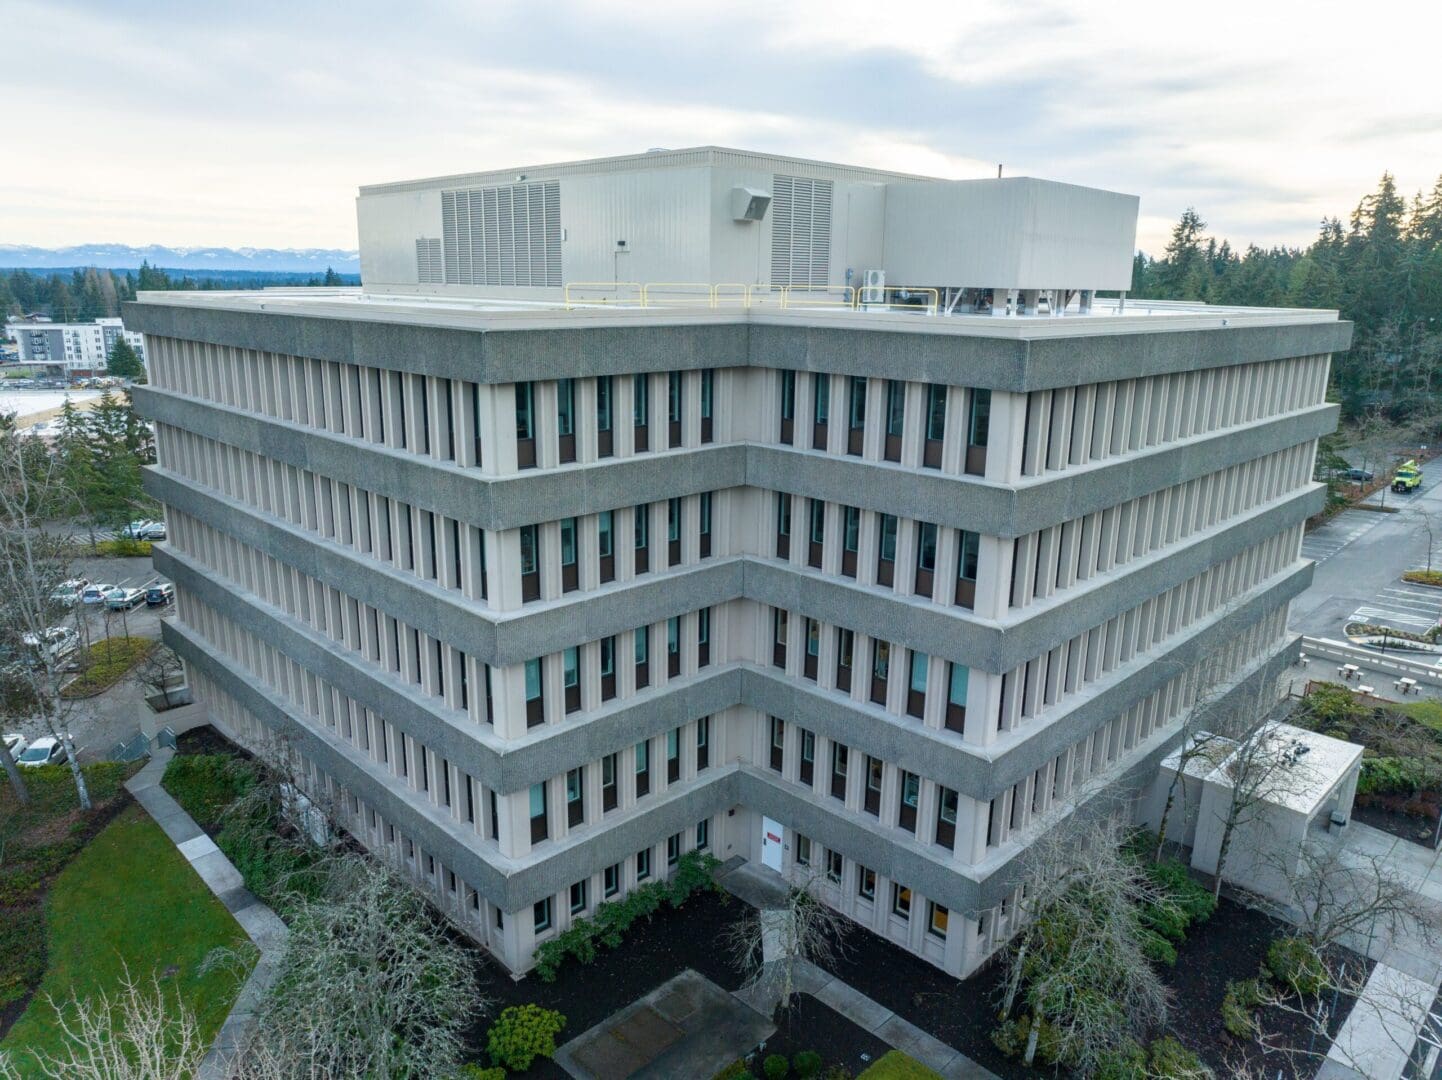 An aerial view of a large office building.